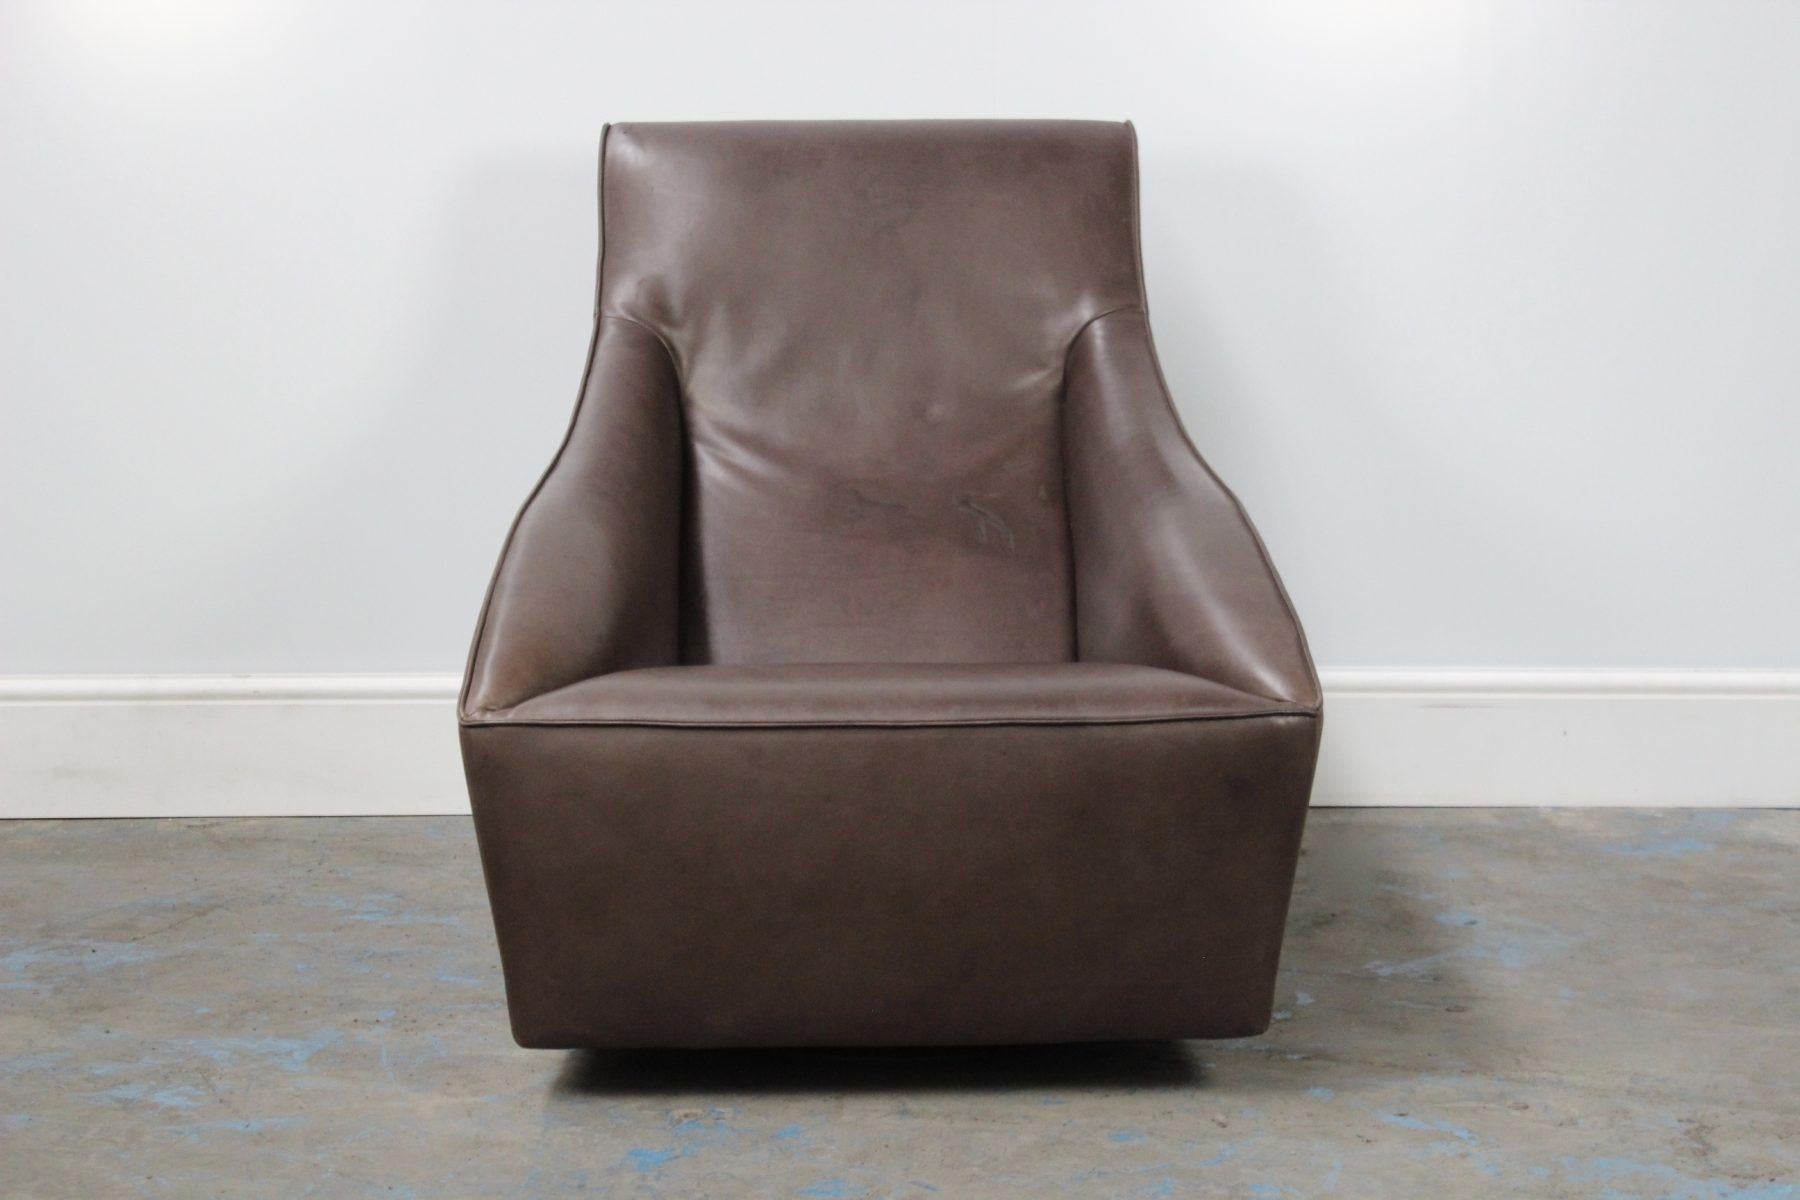 On offer on this occasion is a superb, beautifully-presented example of the iconic “Doda” Rotating/Swivel Armchair in a stunning Dark Brown Leather, manufactured by the leading Italian Furniture House, Molteni & C.

As you will no doubt be aware